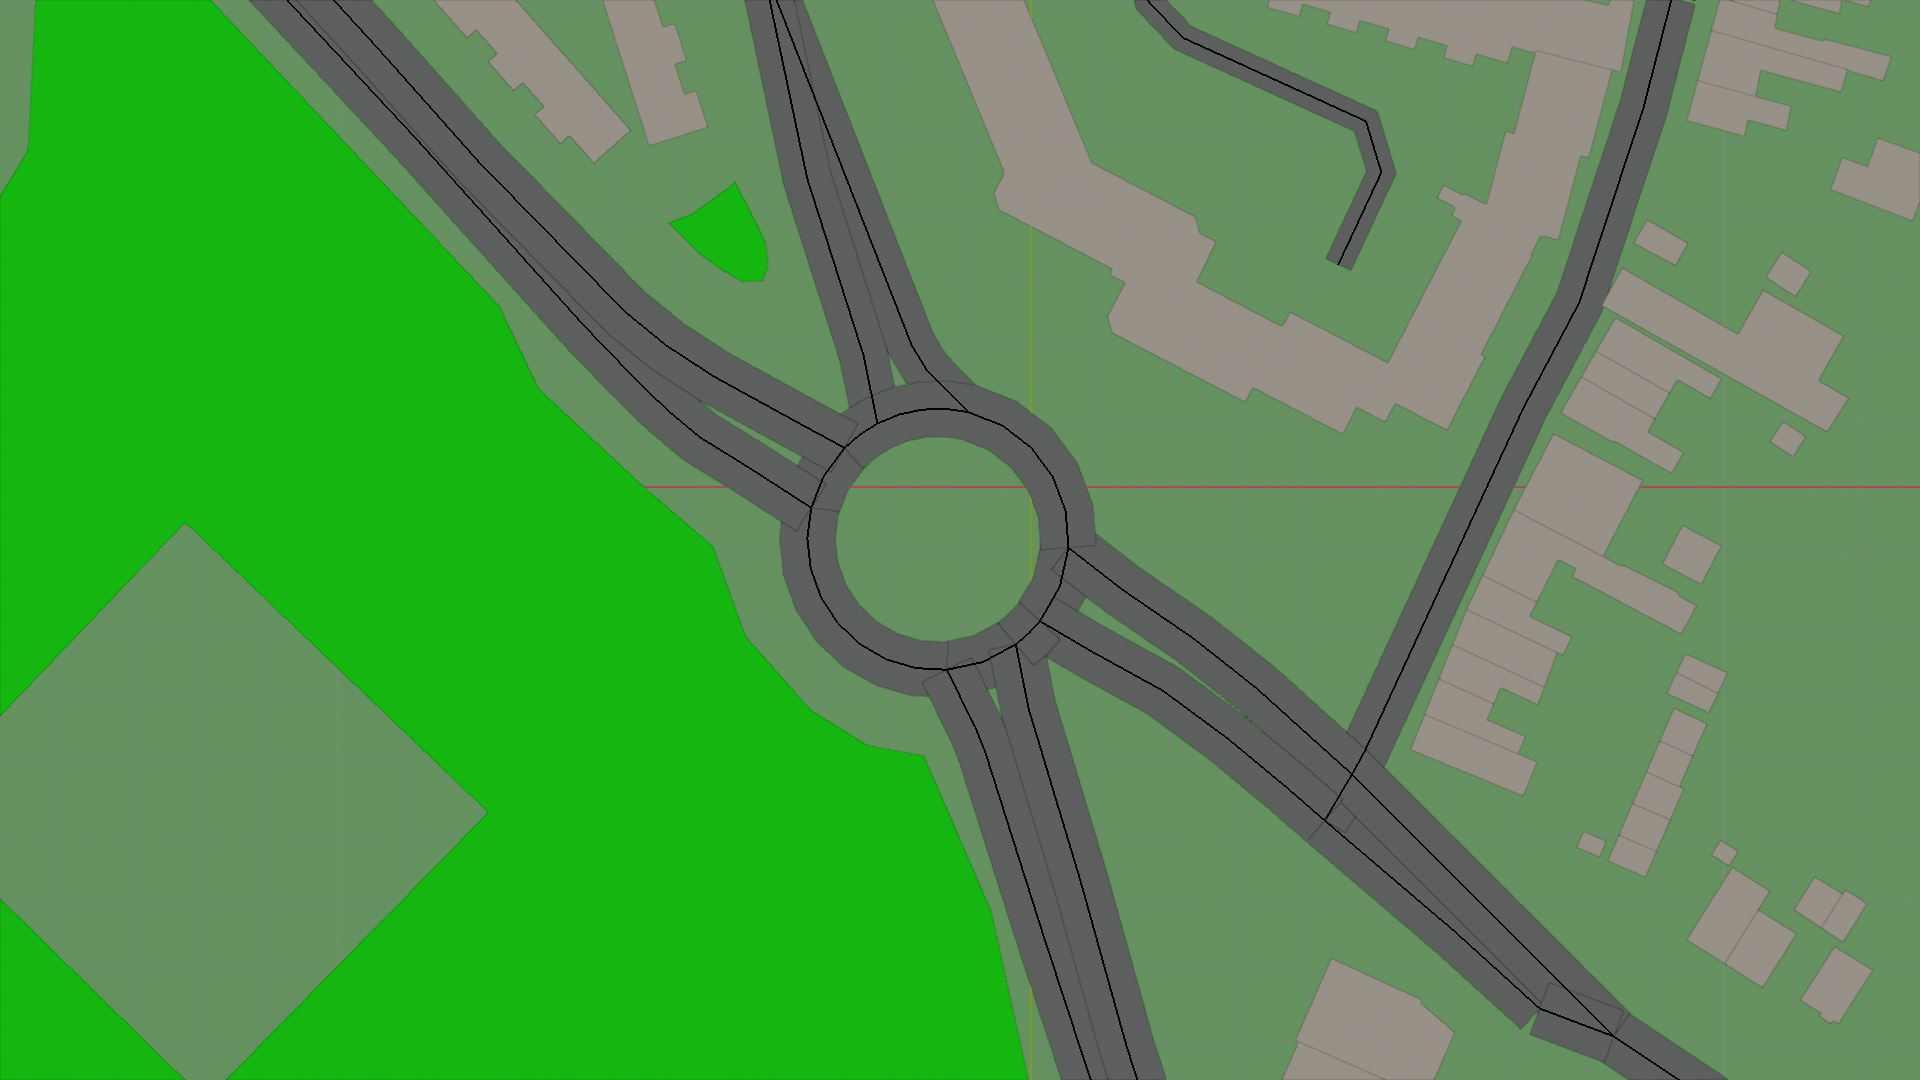 ../../_images/view3d-traffic-osm-import.png